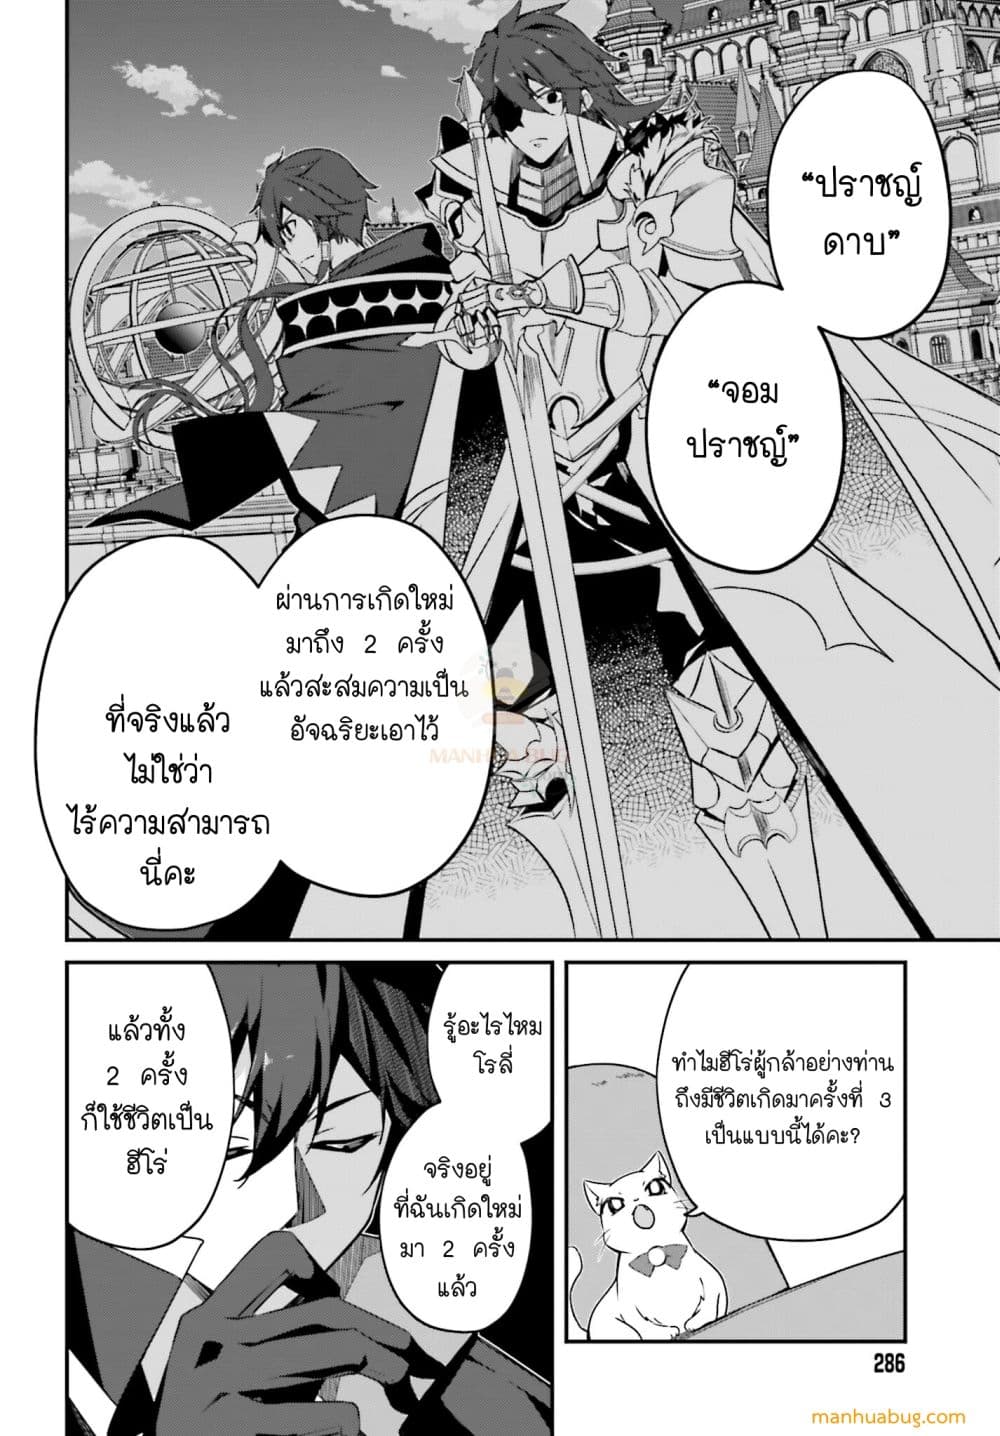 THE INCOMPETENT PRINCE WHO HAS BEEN BANISHED WANTS TO HIDE HIS ABILITIES~ ตอนที่ 1 (19)